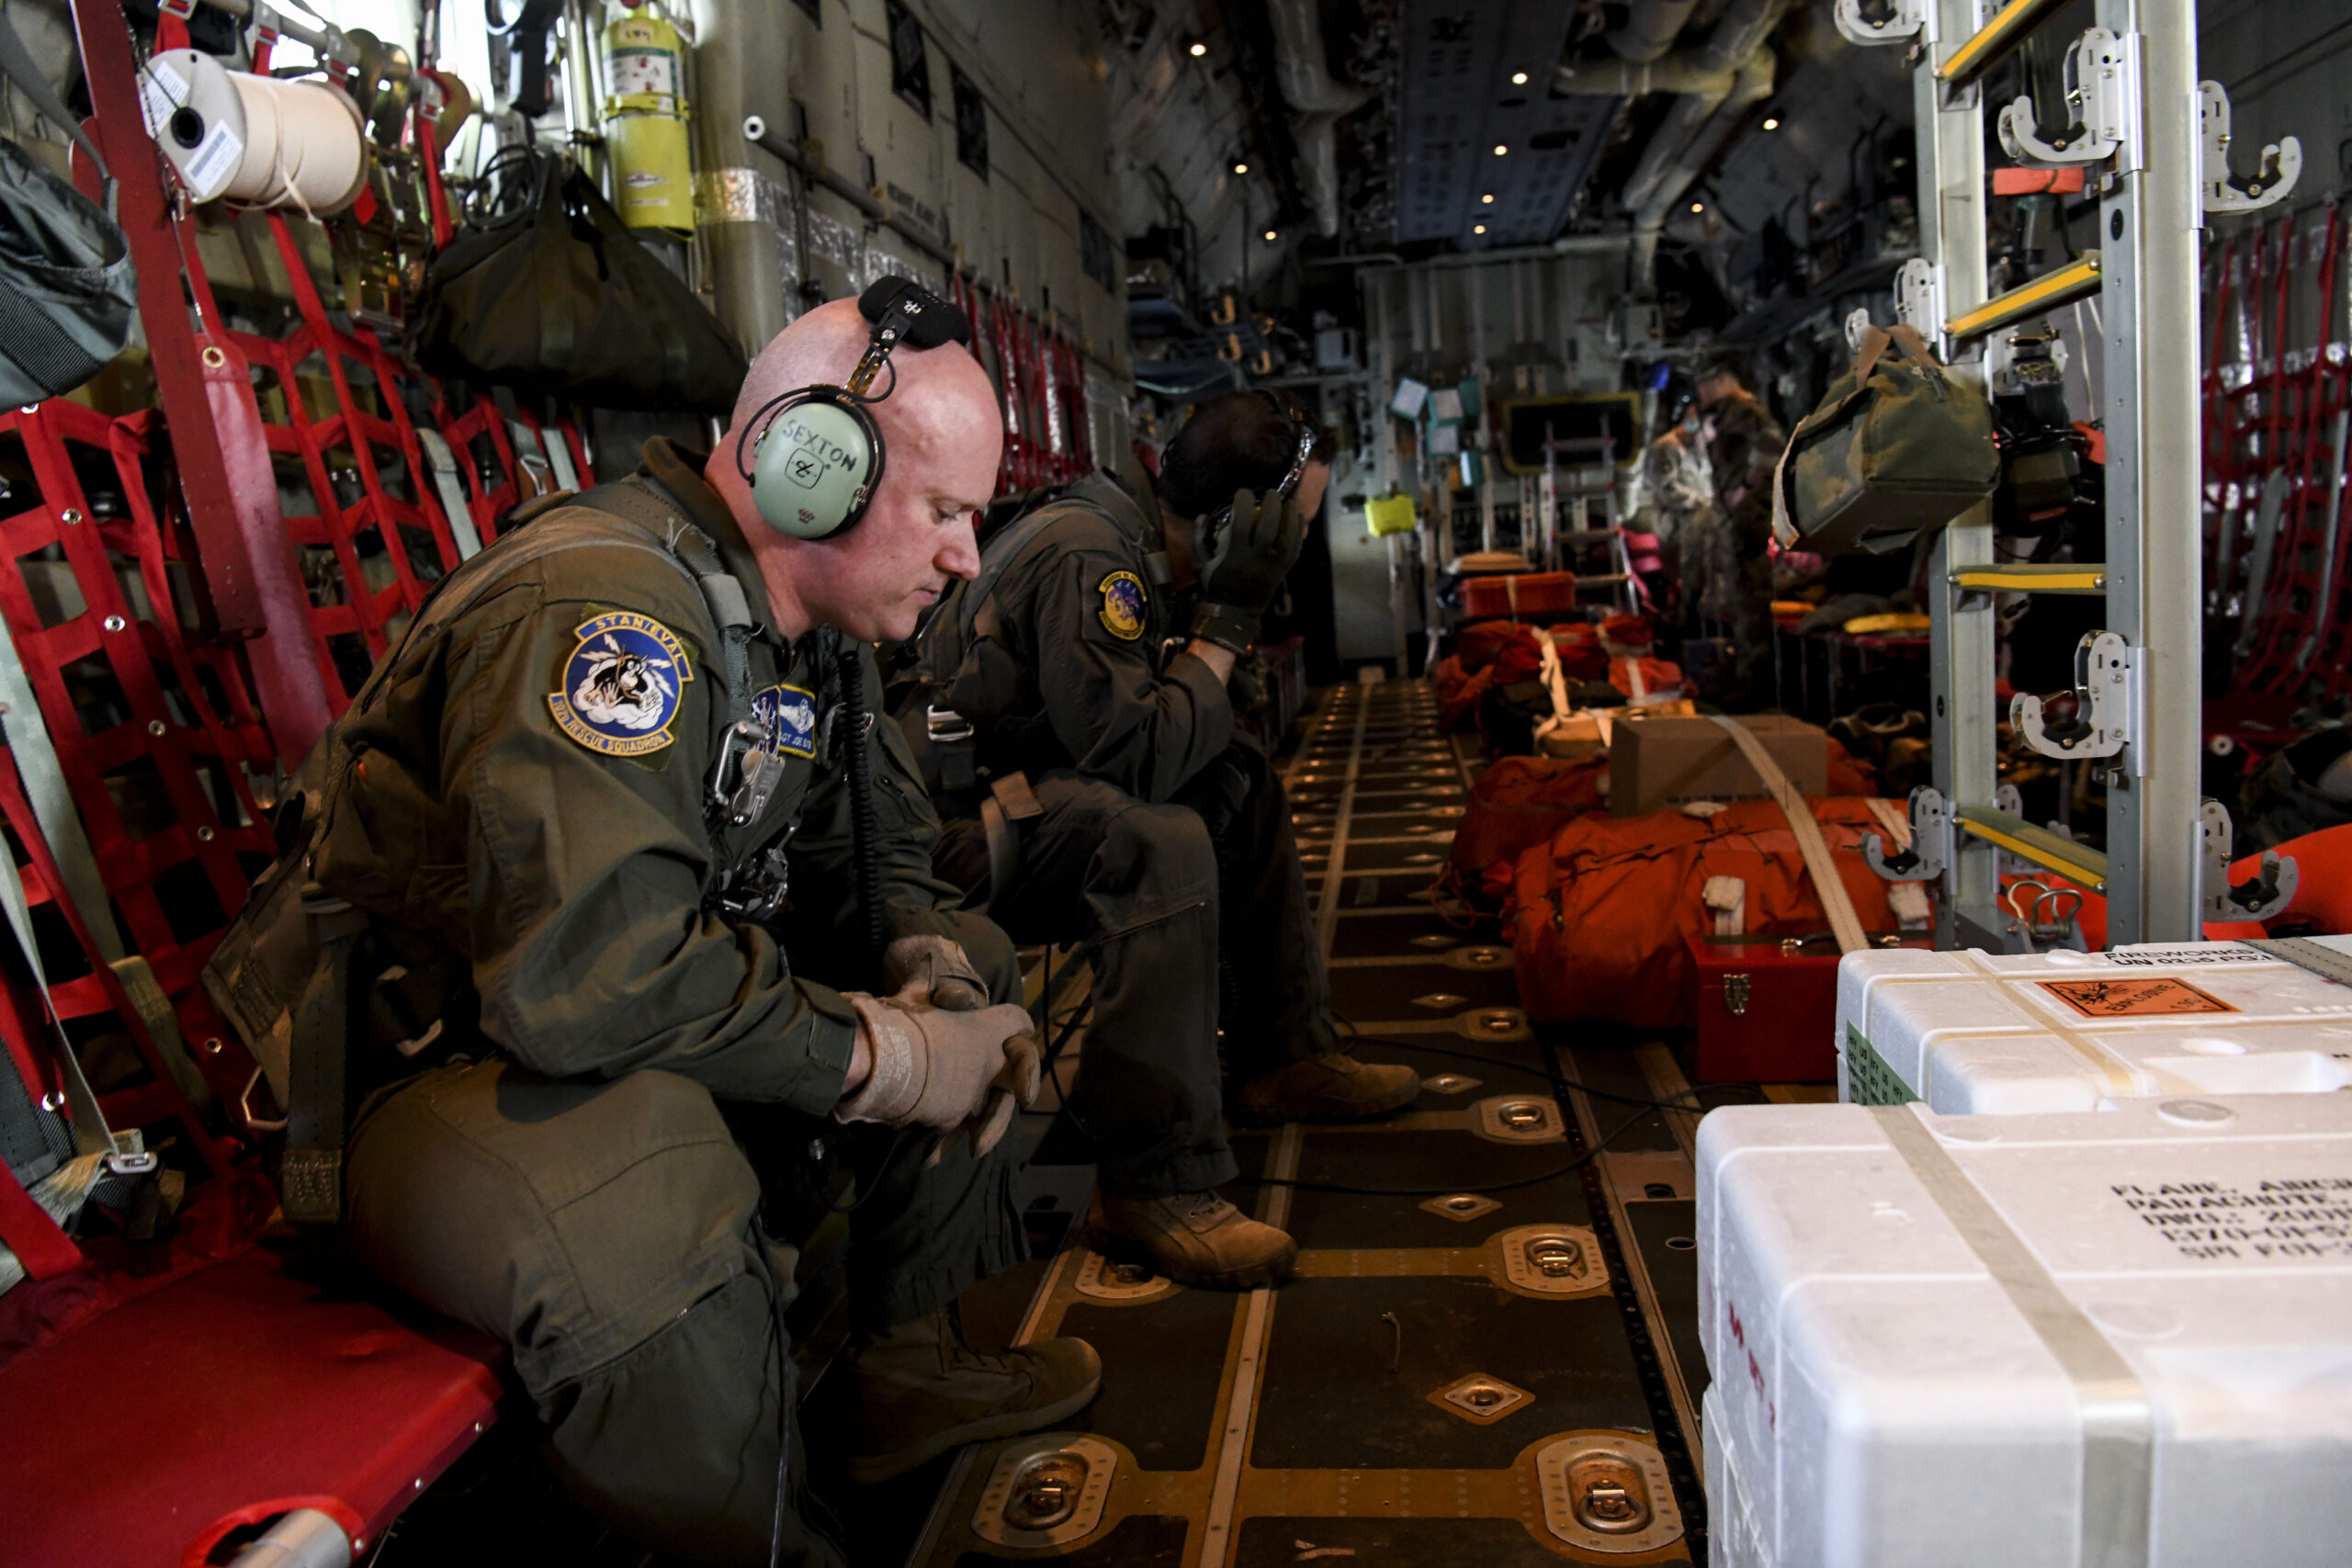 N.Y. Air National Guard 106th Rescue Wing Master Sgt. Joseph Sexton, a 102nd Rescue Squadron loadmaster, sits on-board an HC-130J Combat King II search and rescue aircraft, participating in a search of a 32-foot vessel 1,200 miles off the coast of Long Island on Friday, May 20.  U.S. AIR NATIONAL GUARD PHOTO BY SSGT. DANIEL H. FARRELL